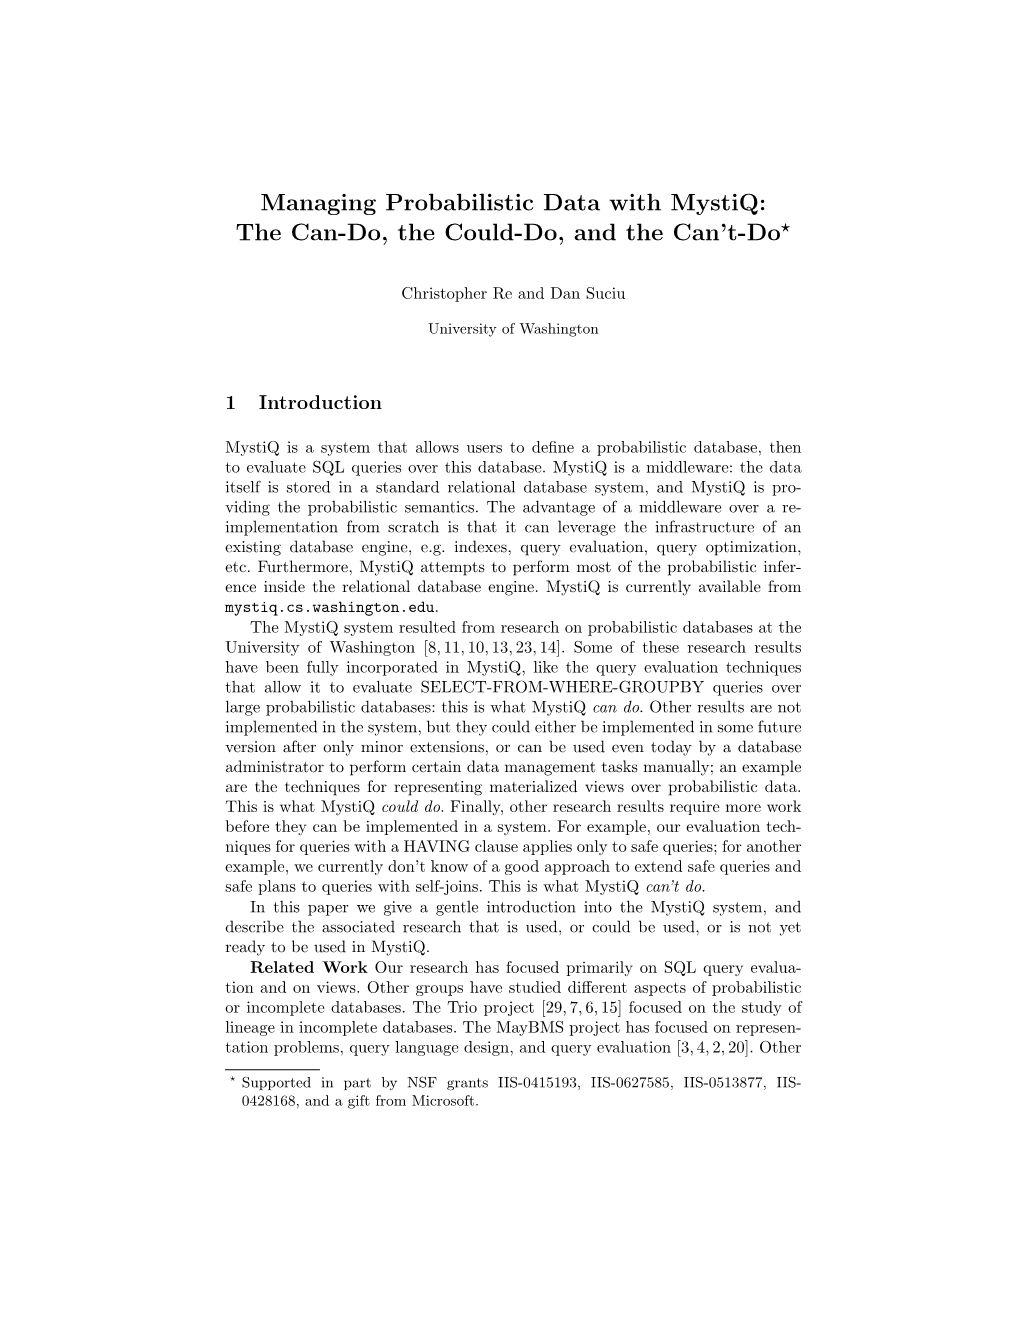 Managing Probabilistic Data with Mystiq: the Can-Do, the Could-Do, and the Can’T-Do?